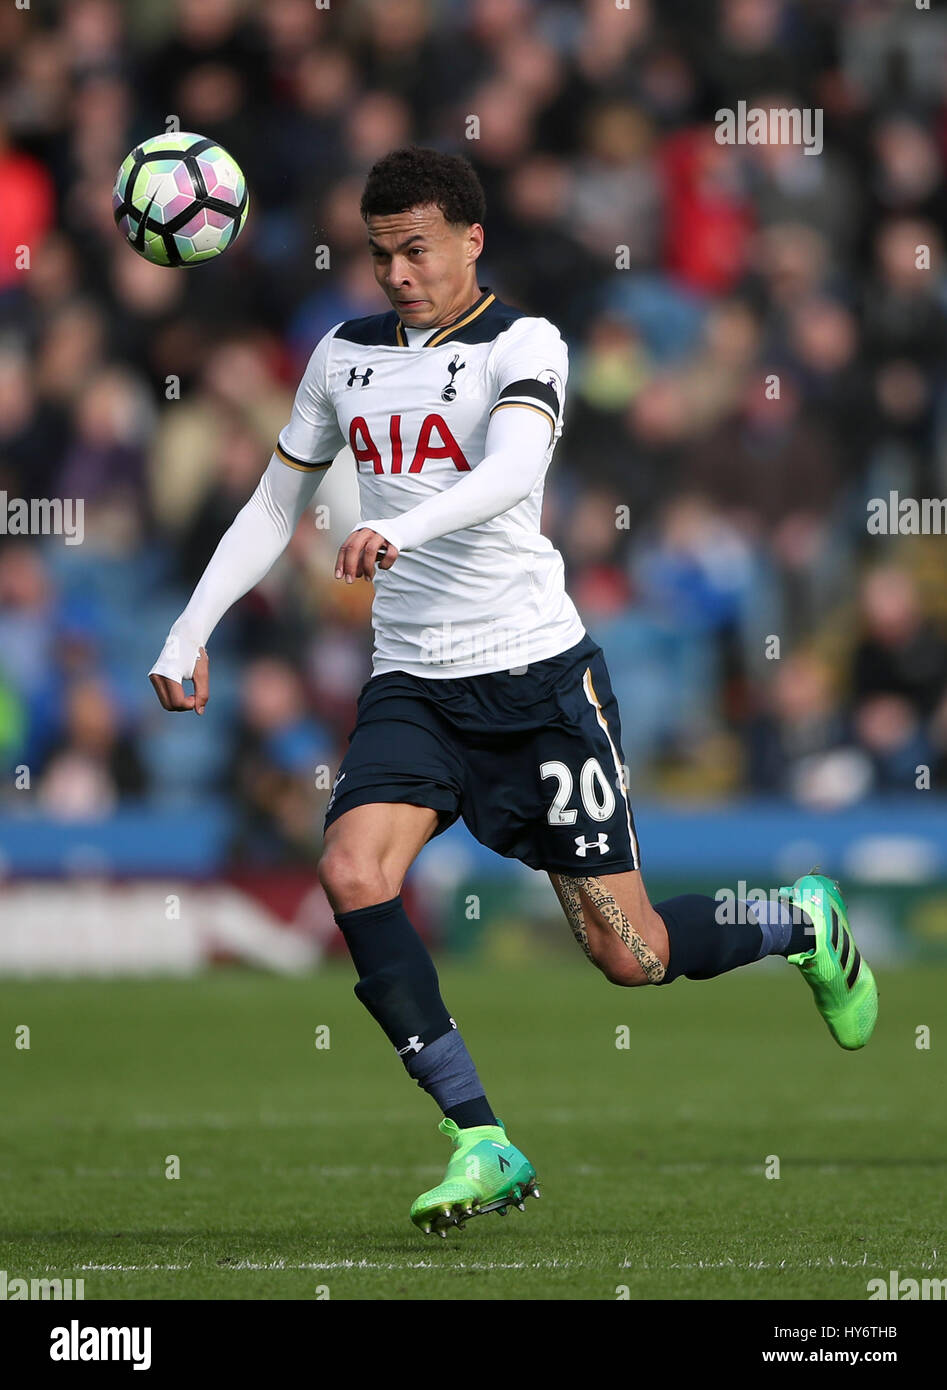 Tottenham Hotspur's Dele Alli during the Premier League match at Turf Moor, Burnley. PRESS ASSOCIATION Photo. Picture date: Saturday April 1, 2017. See PA story SOCCER Burnley. Photo credit should read: Nick Potts/PA Wire. RESTRICTIONS: No use with unauthorised audio, video, data, fixture lists, club/league logos or 'live' services. Online in-match use limited to 75 images, no video emulation. No use in betting, games or single club/league/player publications. Stock Photo